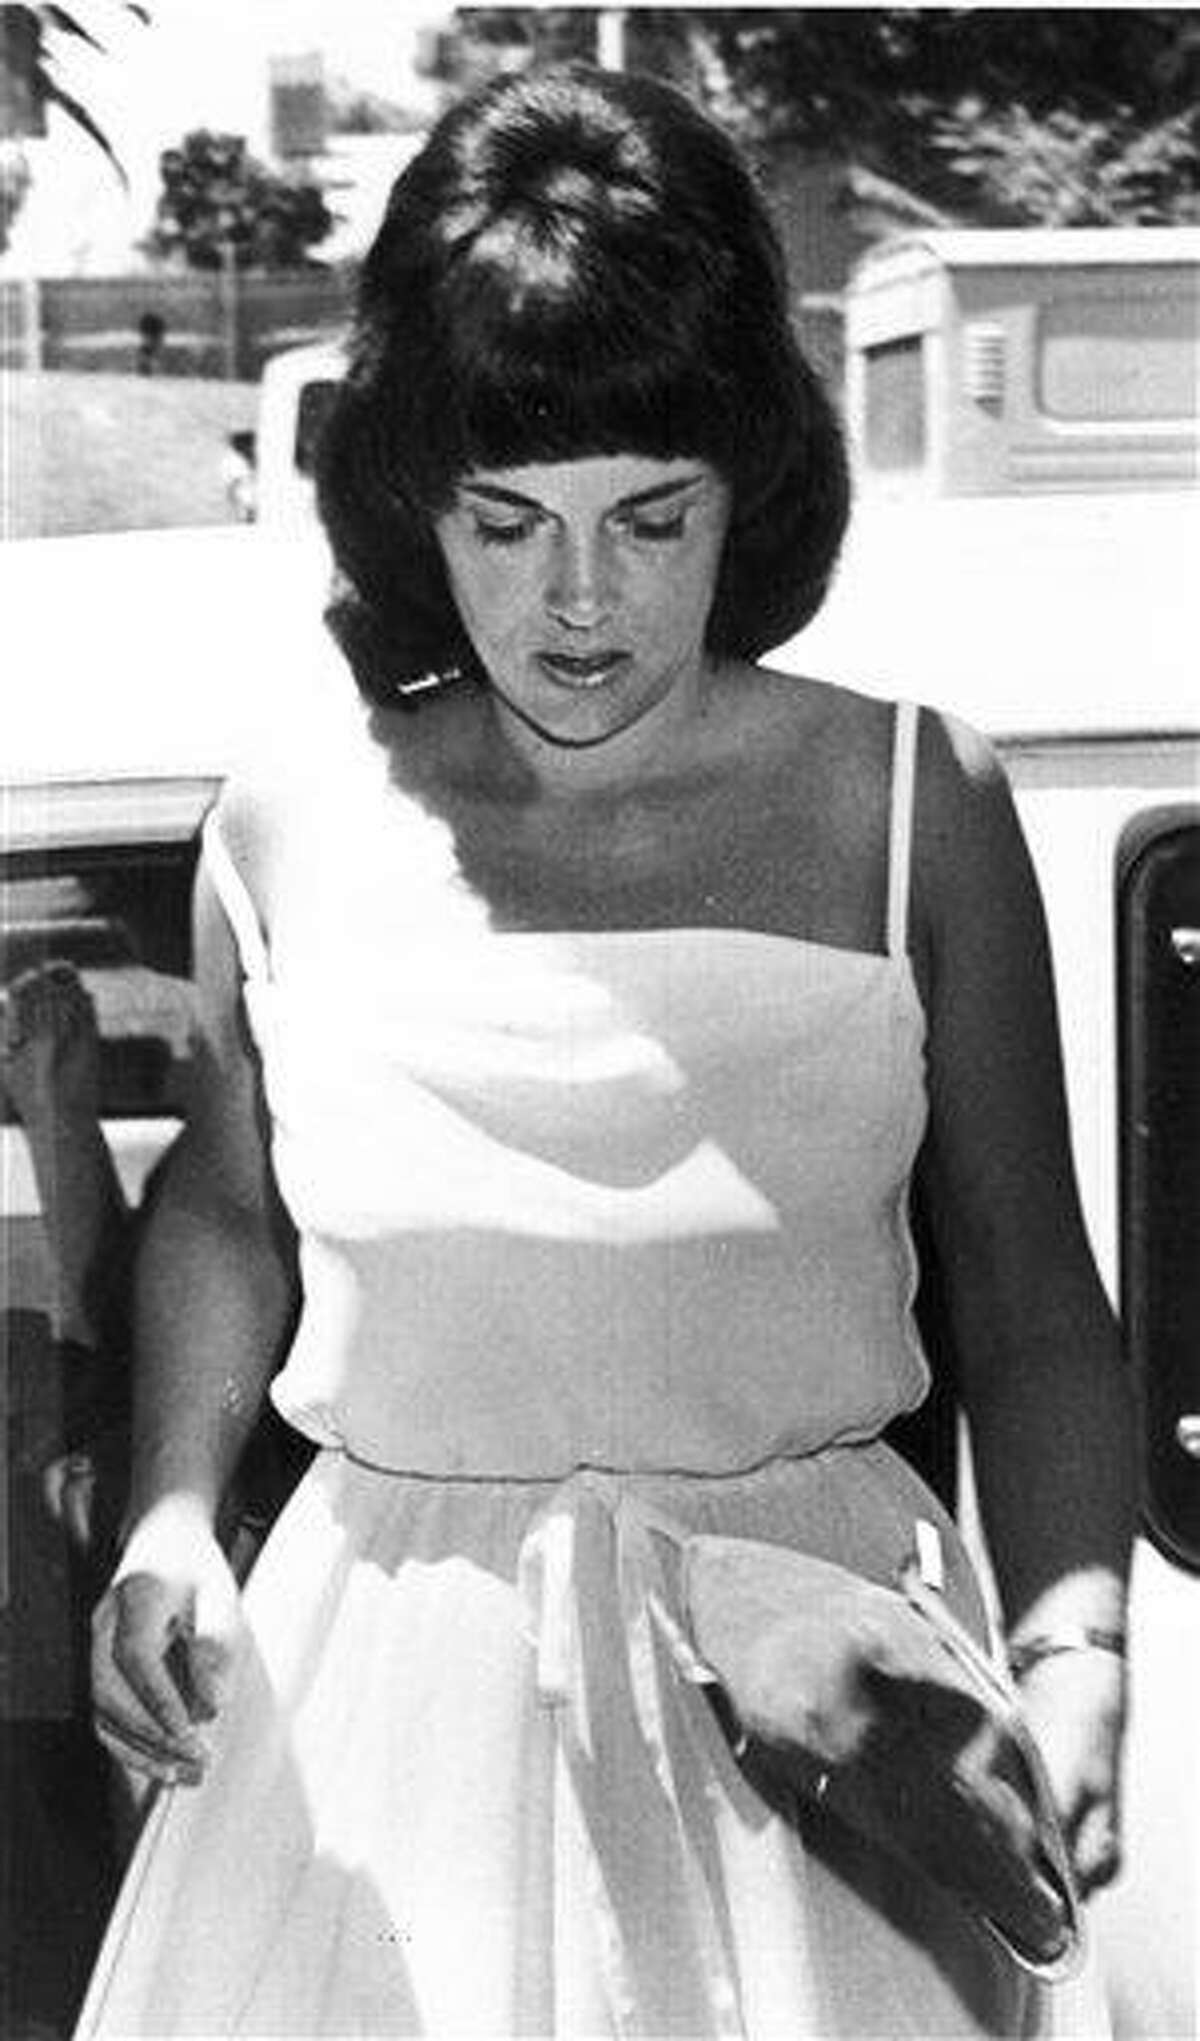 In this 1982 file photo, Lindy Chamberlain leaves a courthouse in Alice Springs, Australia. A coroner found Tuesday that a dingo took Chamberlain's baby, who vanished in the Australian Outback more than 32 years ago in a notorious case that split the nation over suspicions that the infant was murdered. Associated Press